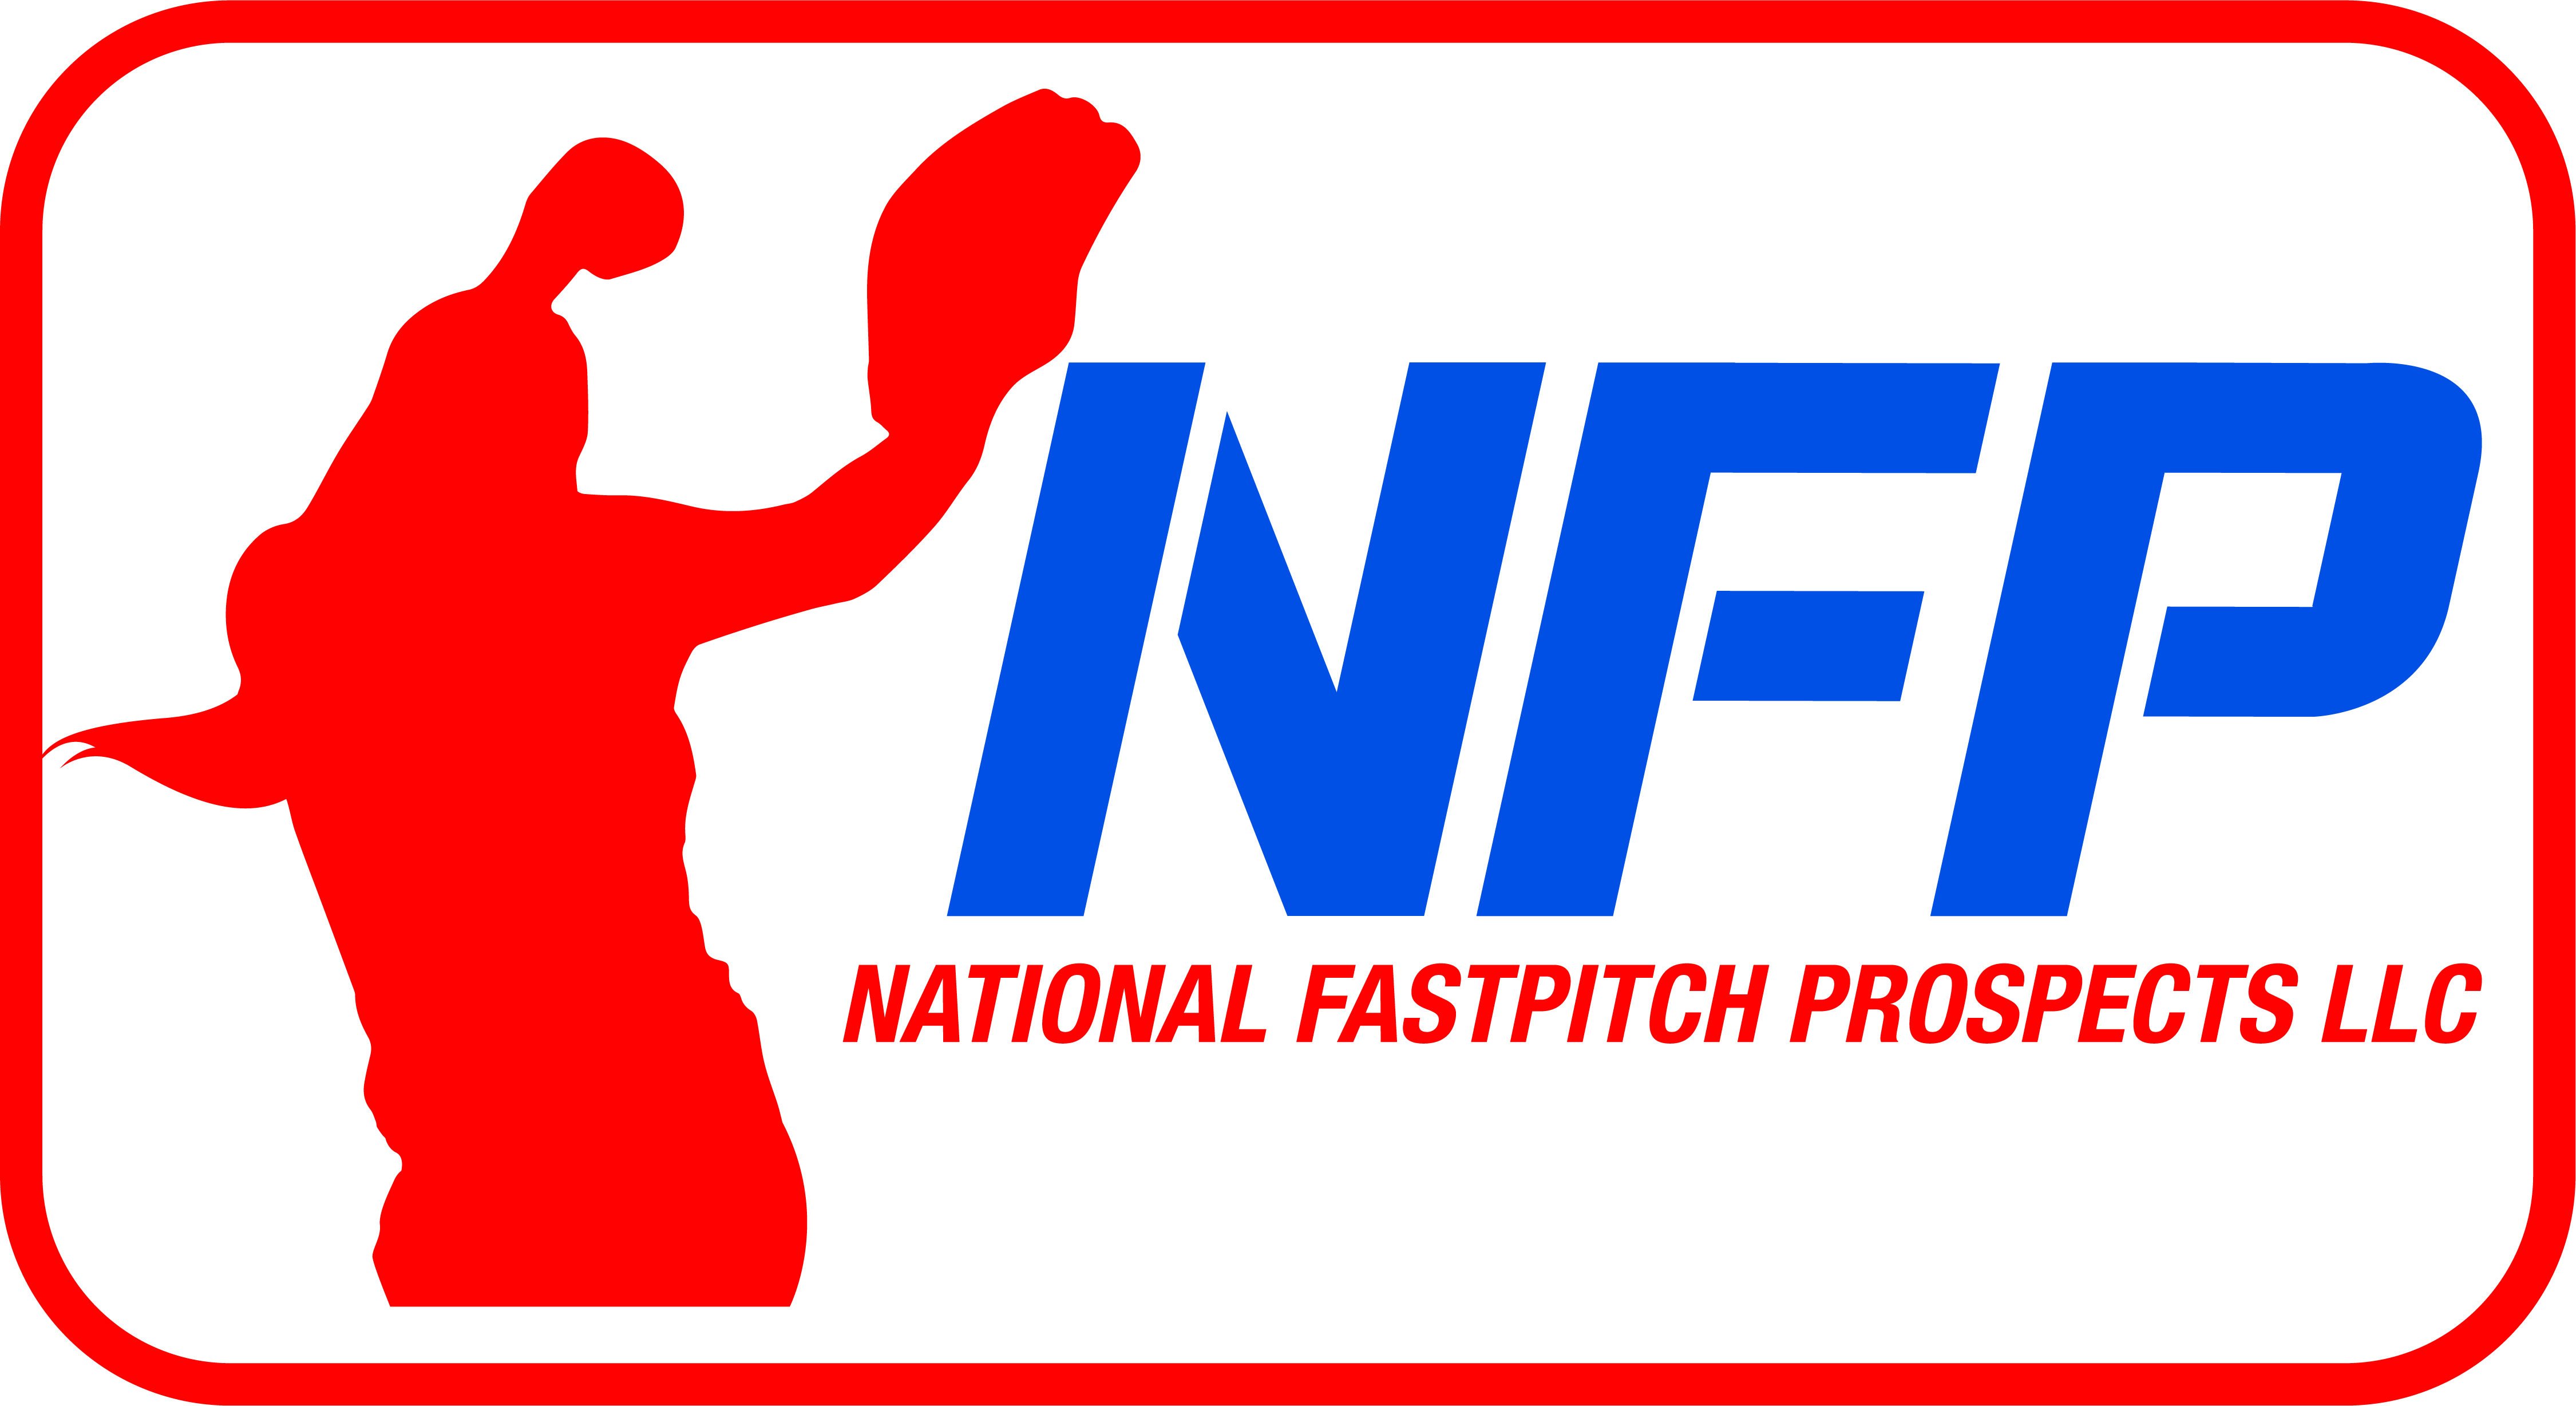 Powered by National Fastpitch Prospects